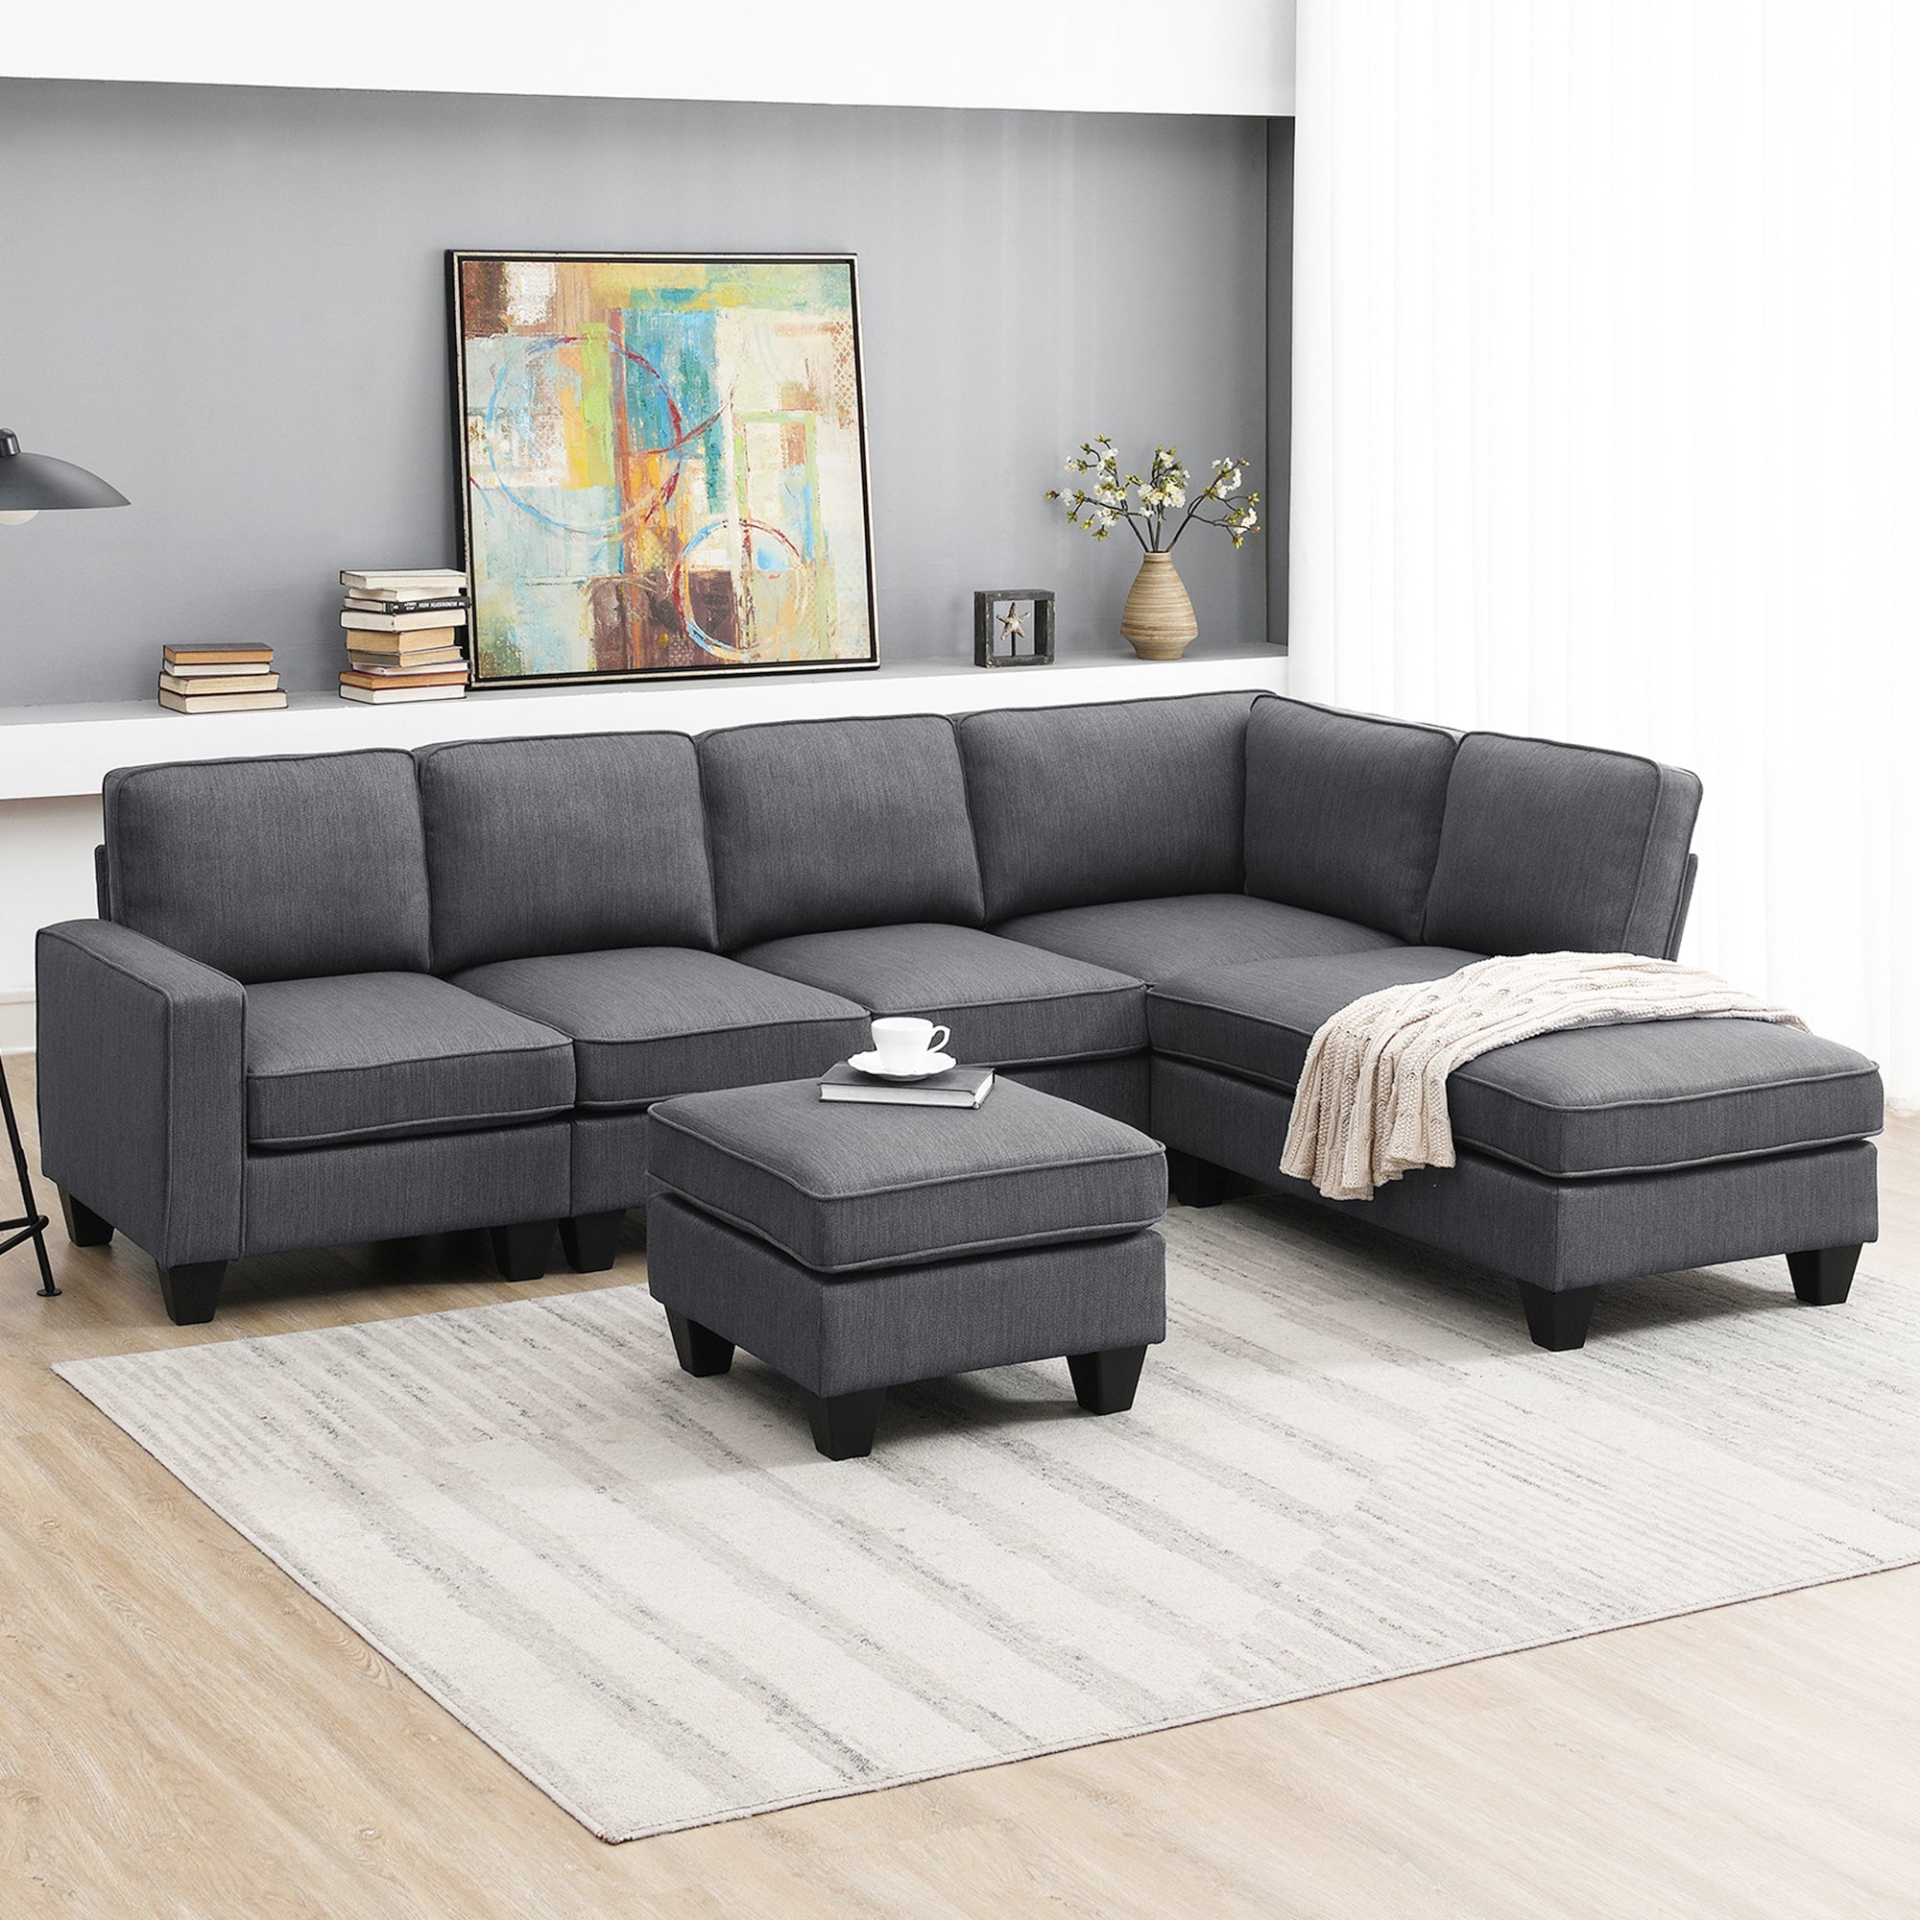 Dark Grey - Plush L-Shape 7-Seat Sectional Sofa with Chaise Lounge and Convertible Ottoman (104"x79")